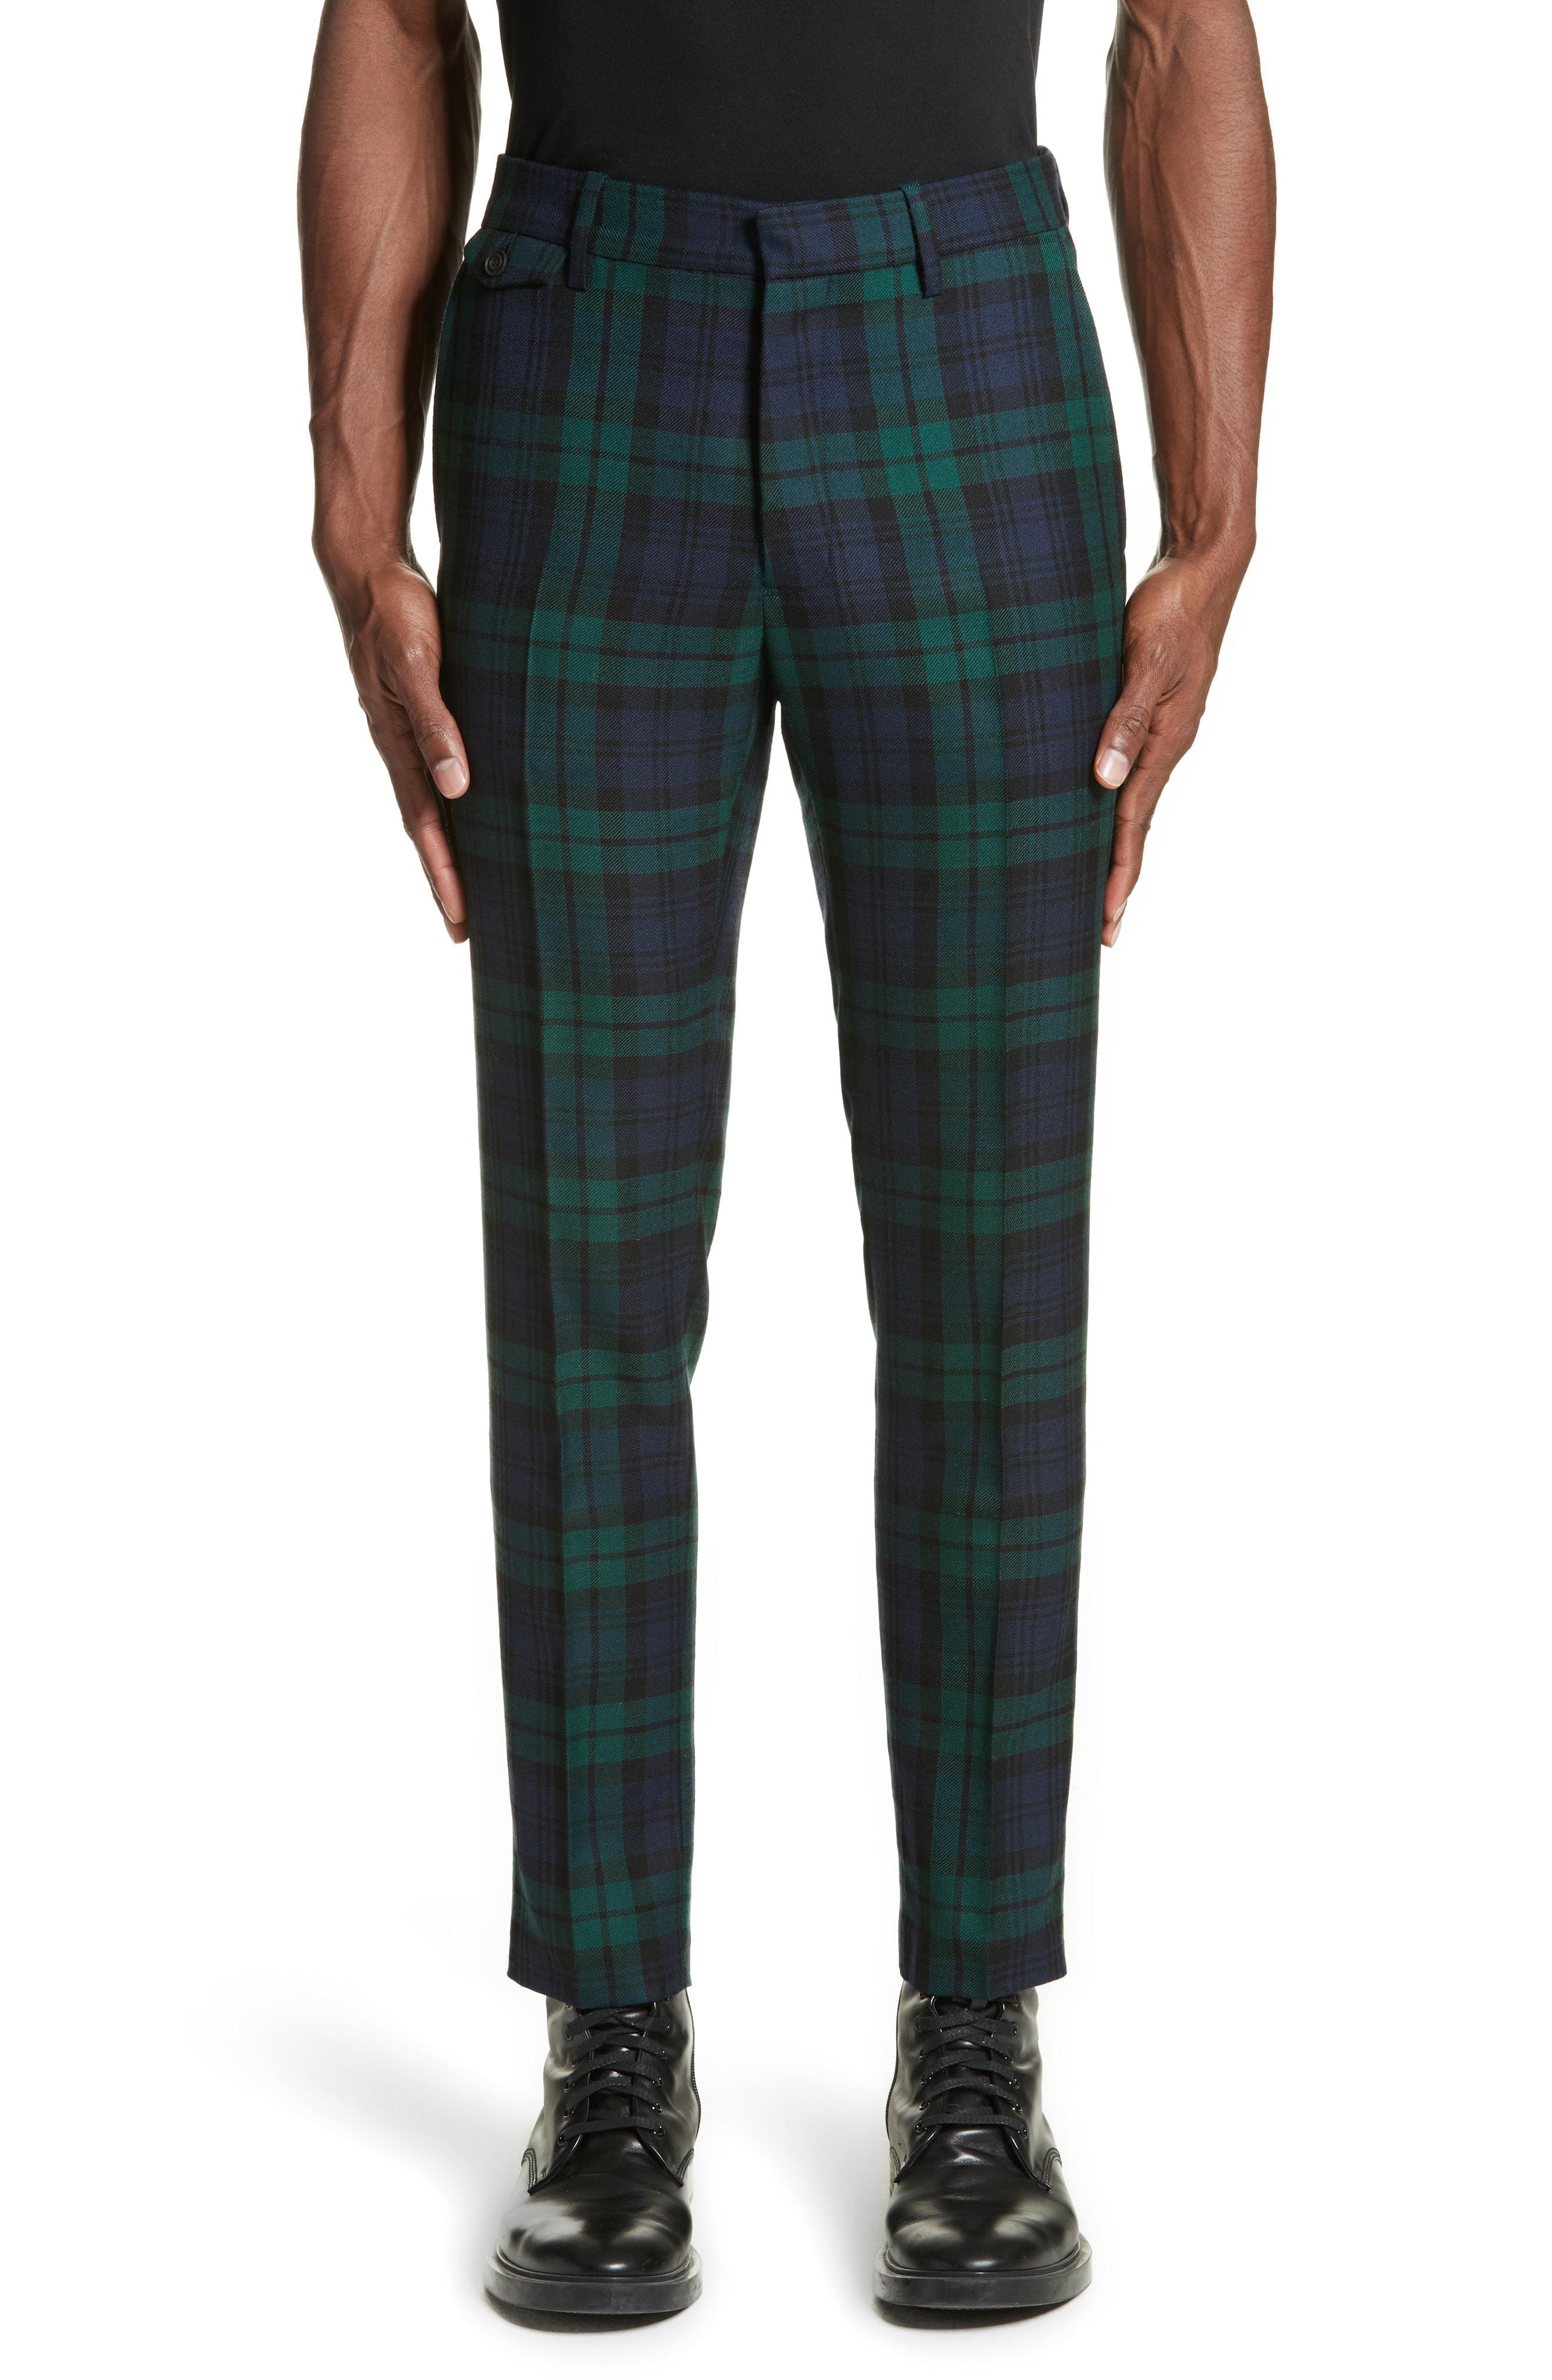 Burberry Serpentine Check Wool Pants in Blue for Men - Lyst